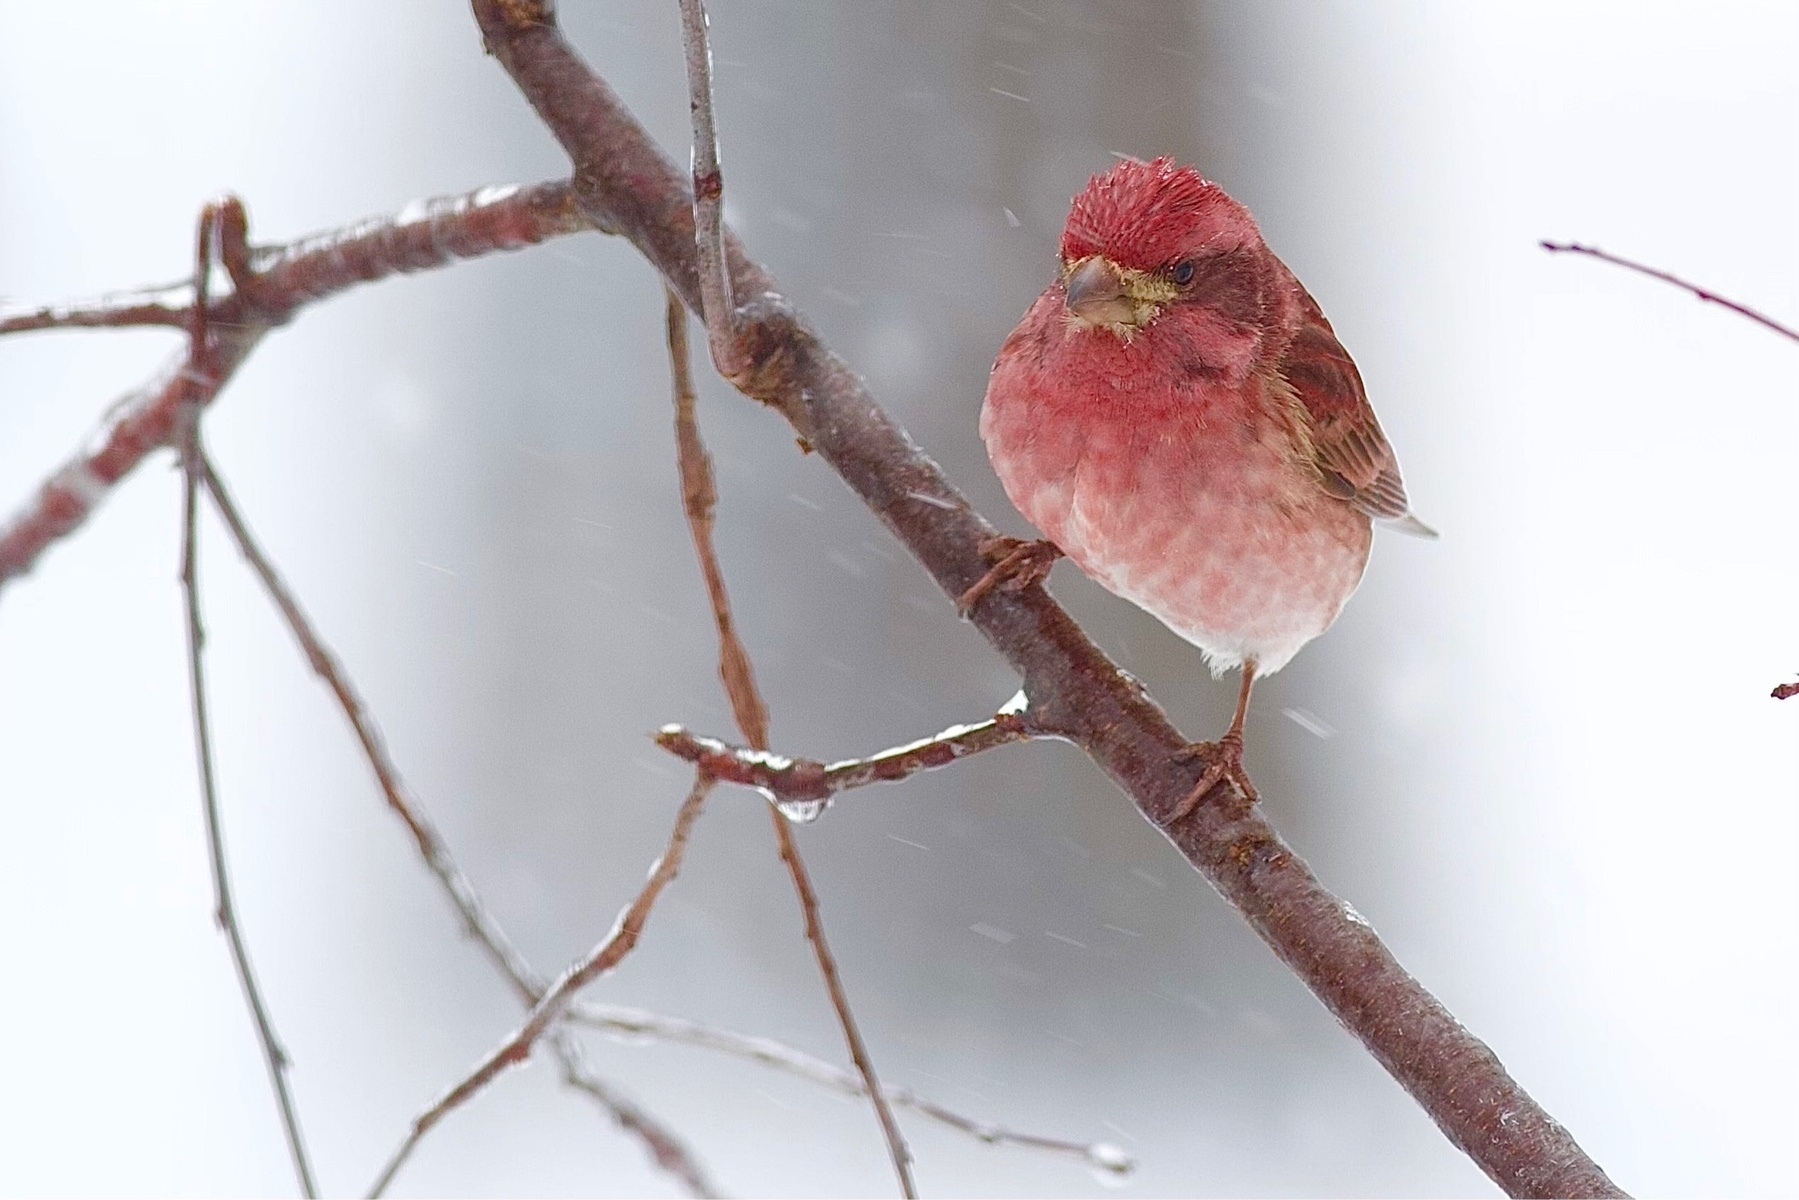 A small pinkish purple songbird is perched on a branch, blurred snow coming down around it